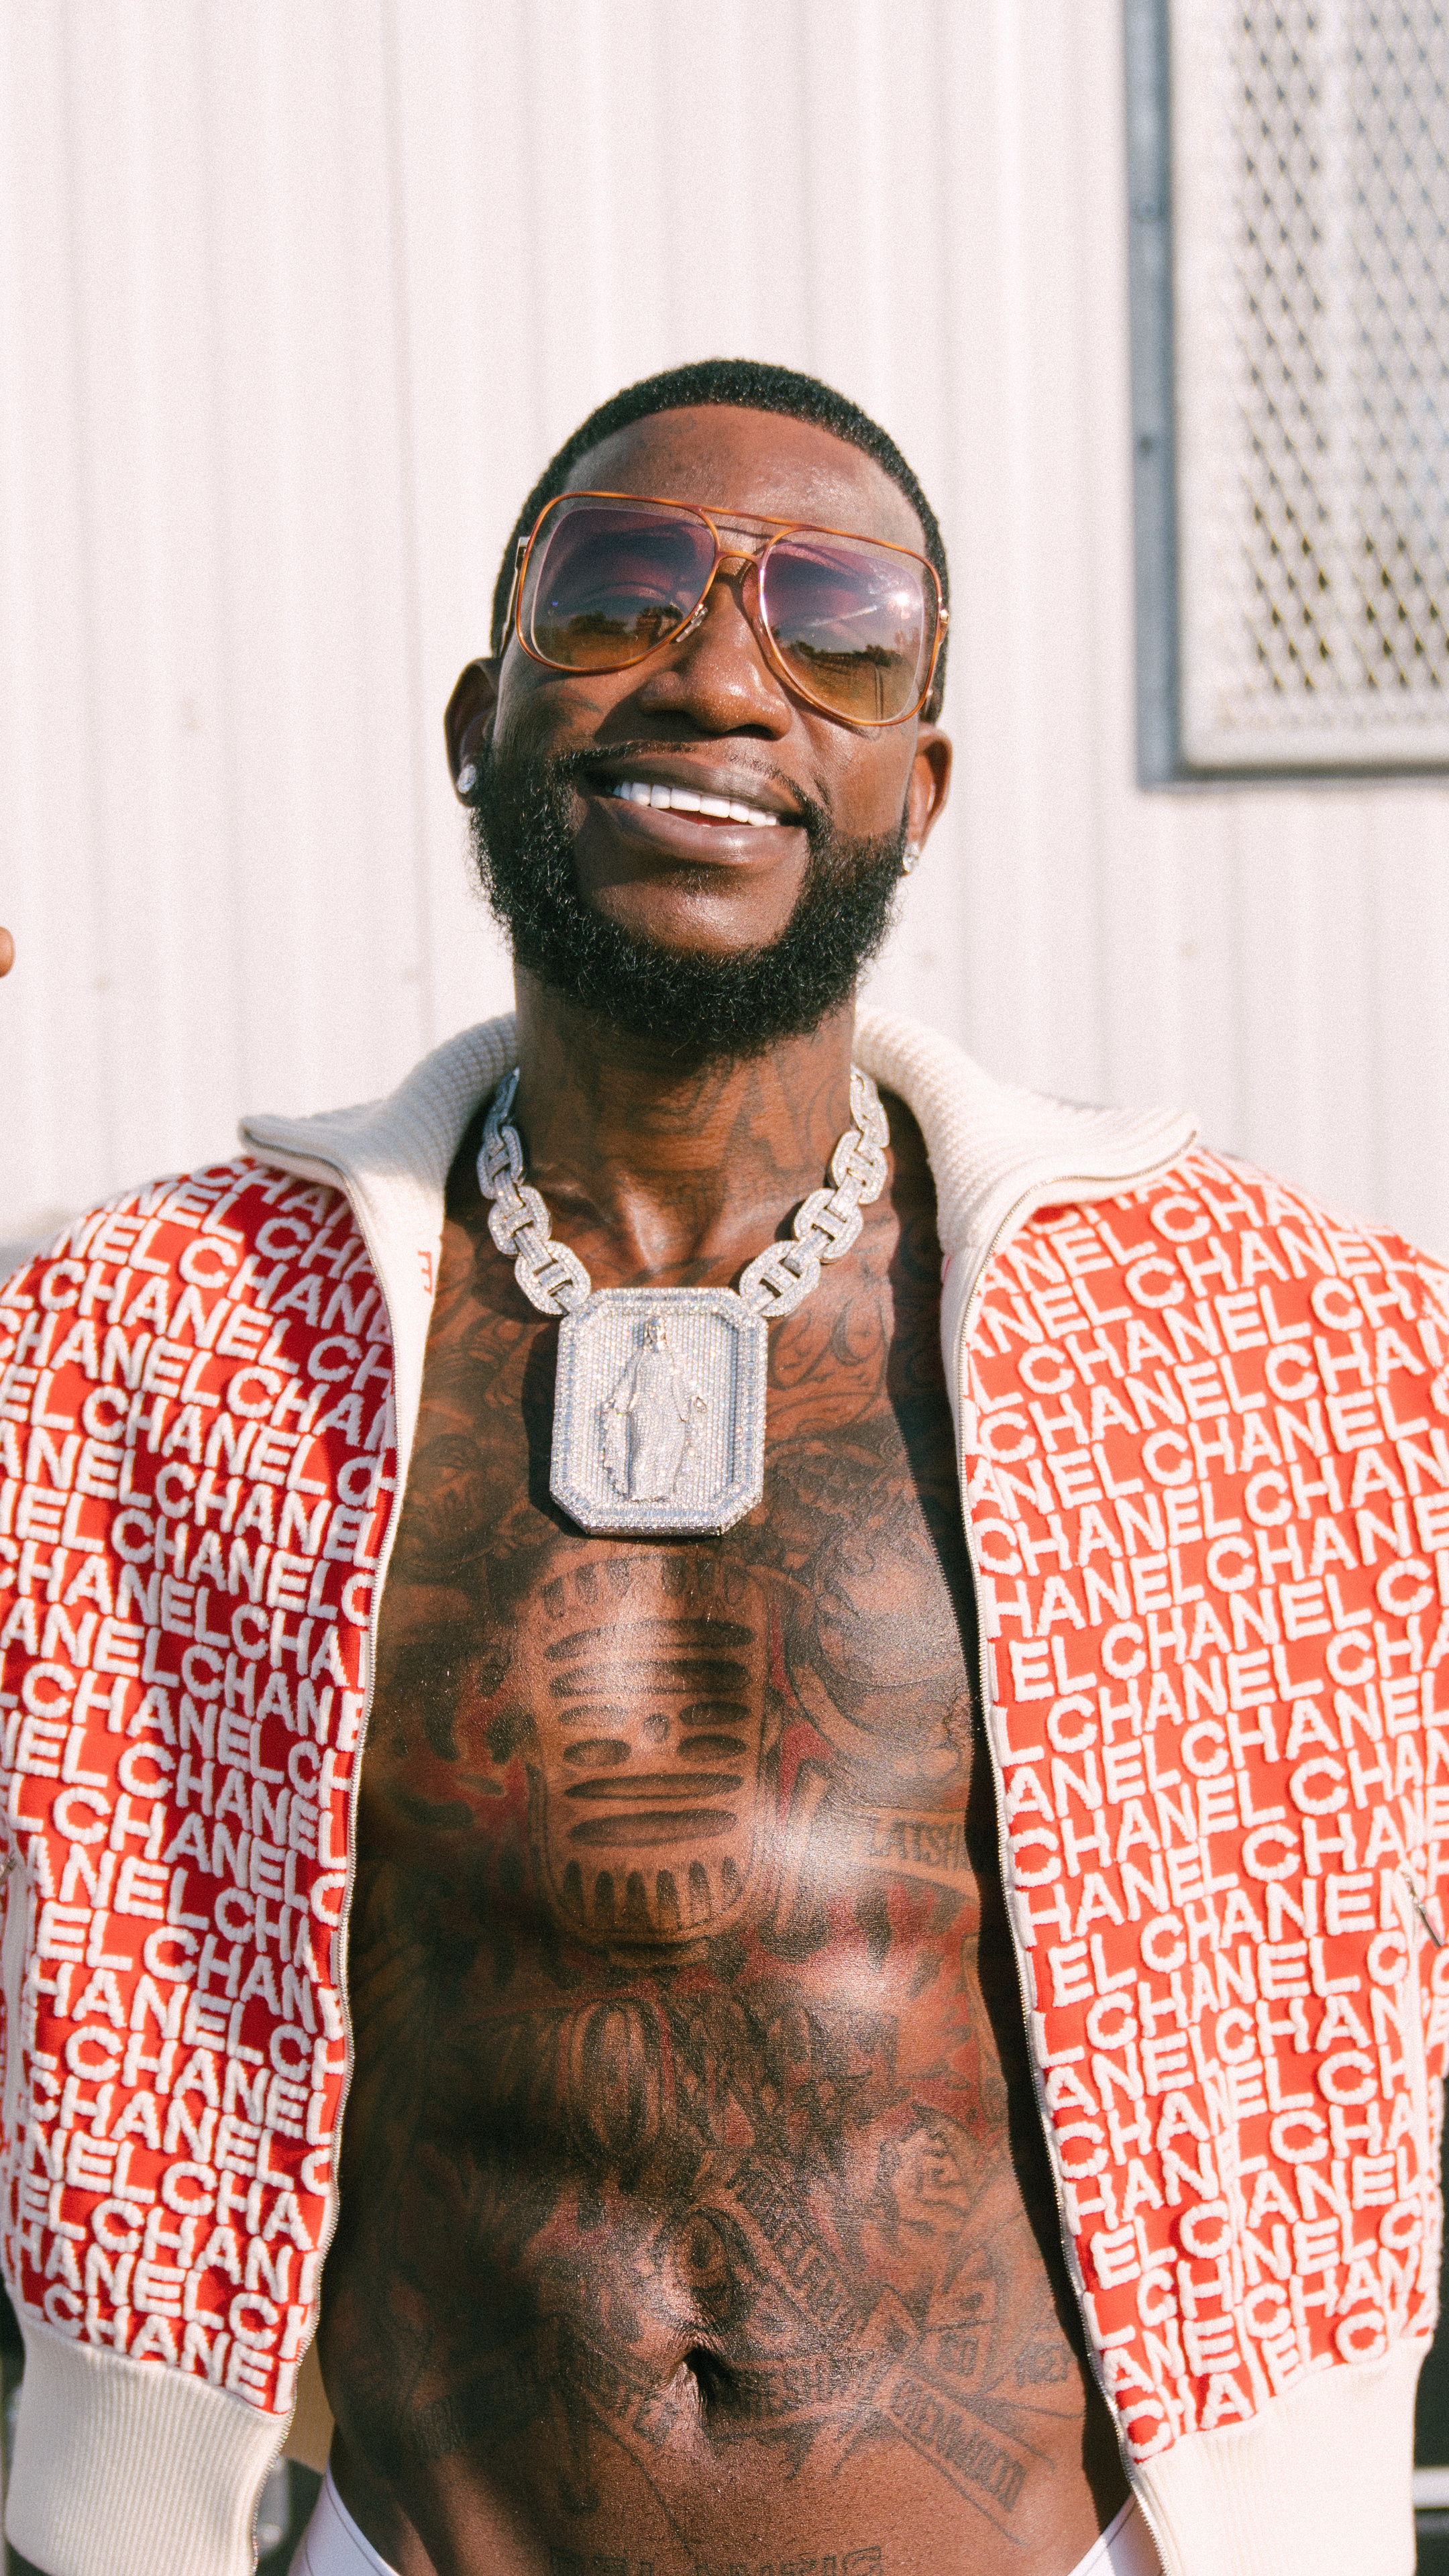 Gucci Mane Xperia wallpapers, HD 4K images, 2160x3840 4K Handy